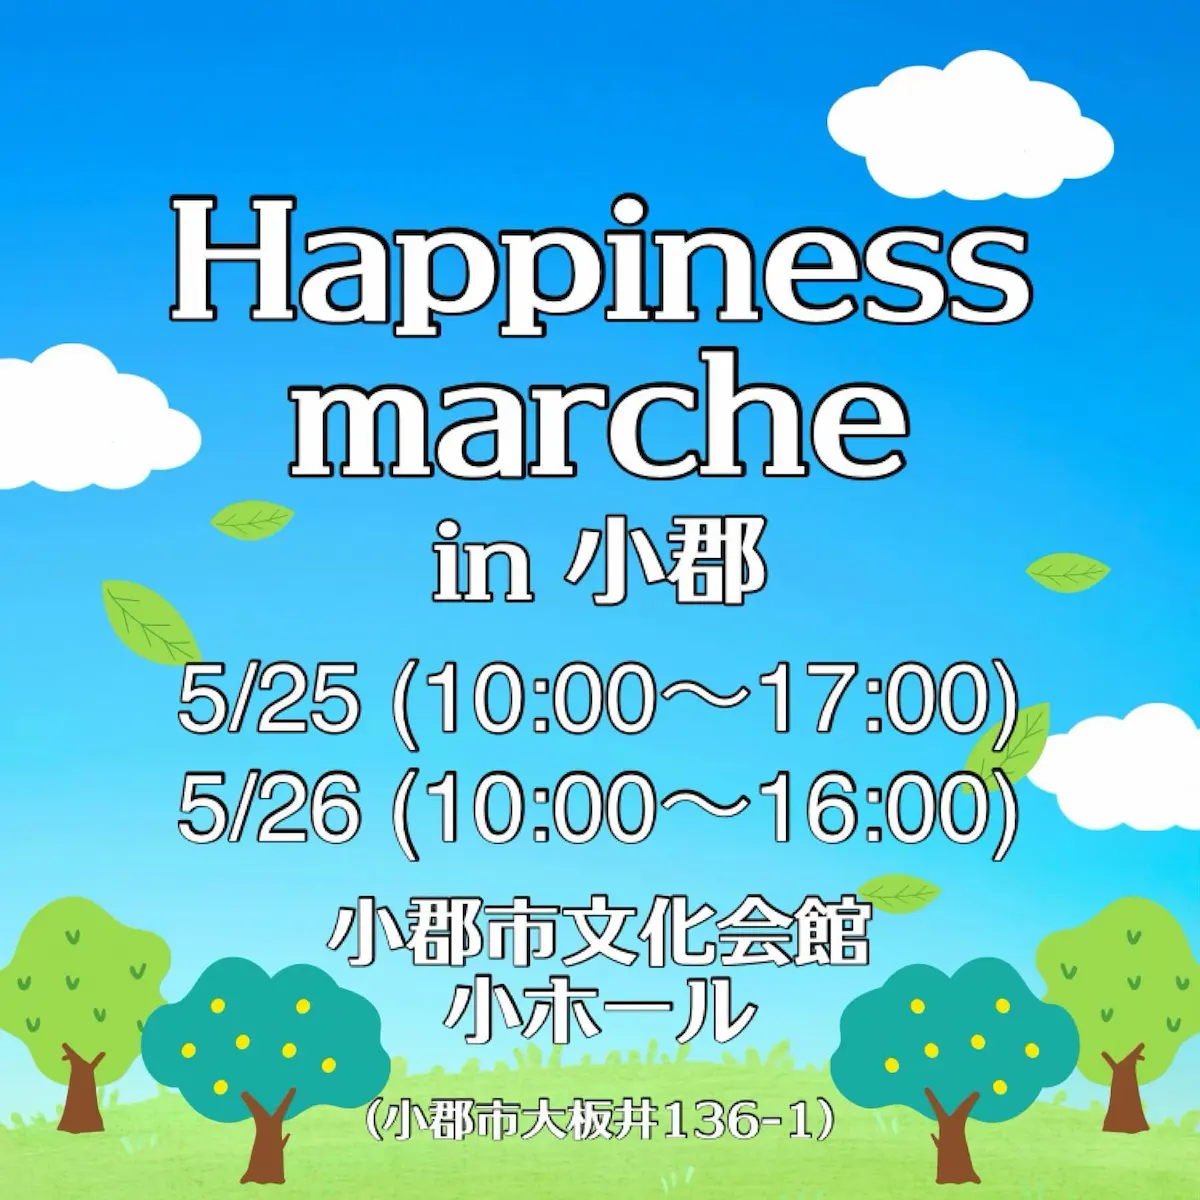 Happiness marche in 小郡